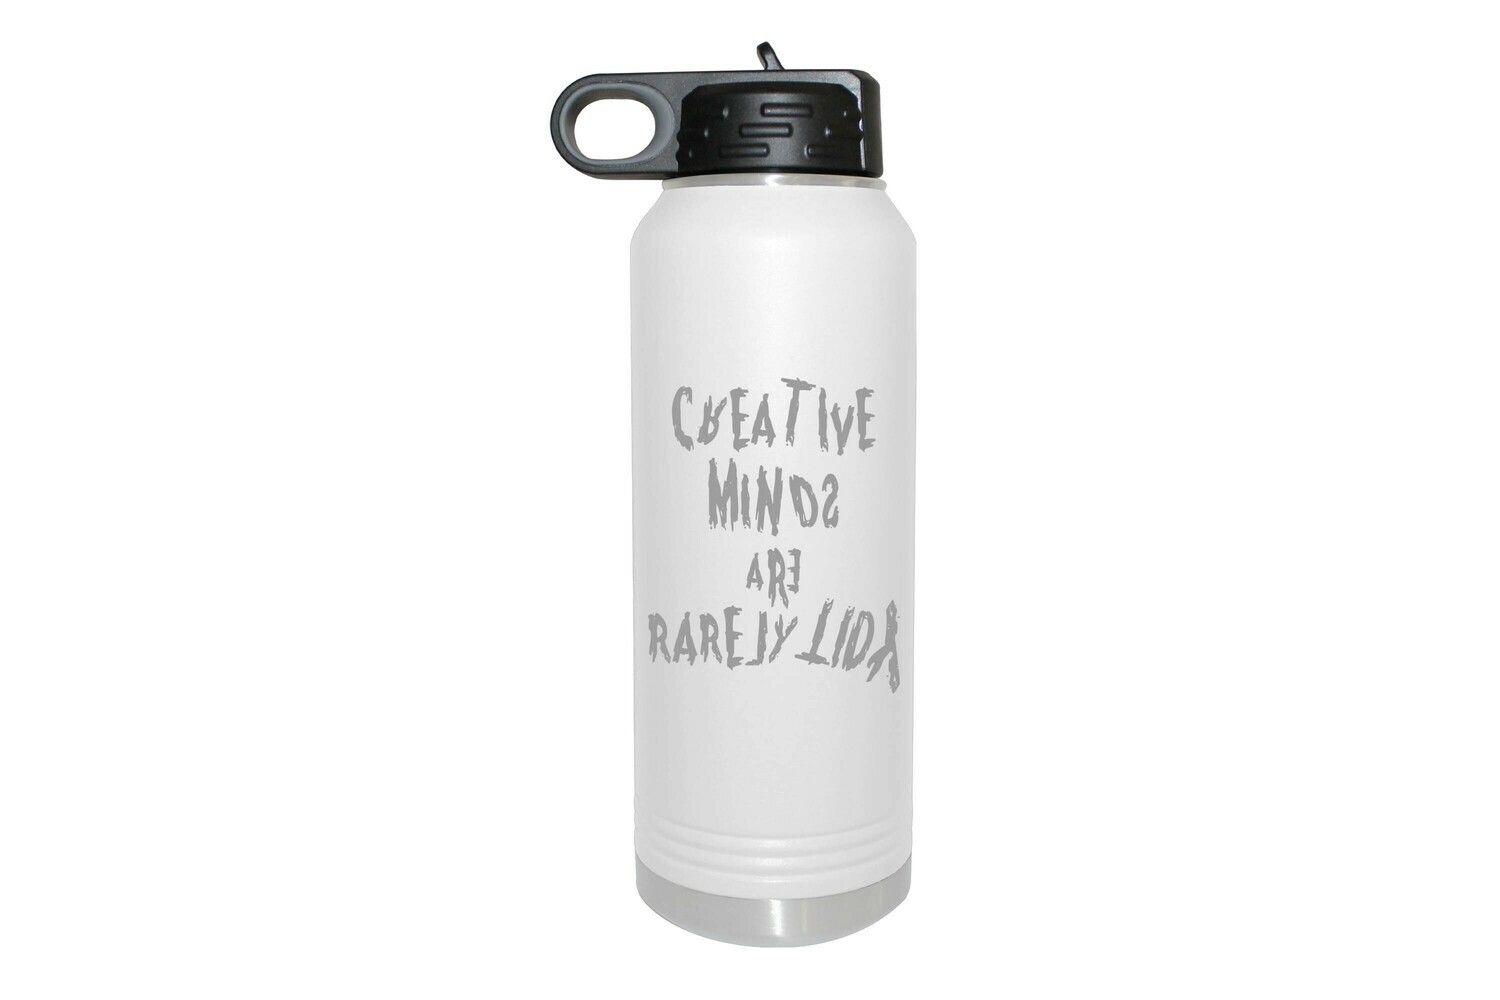 Creative minds are rarely tidy Insulated Water Bottle 32 oz